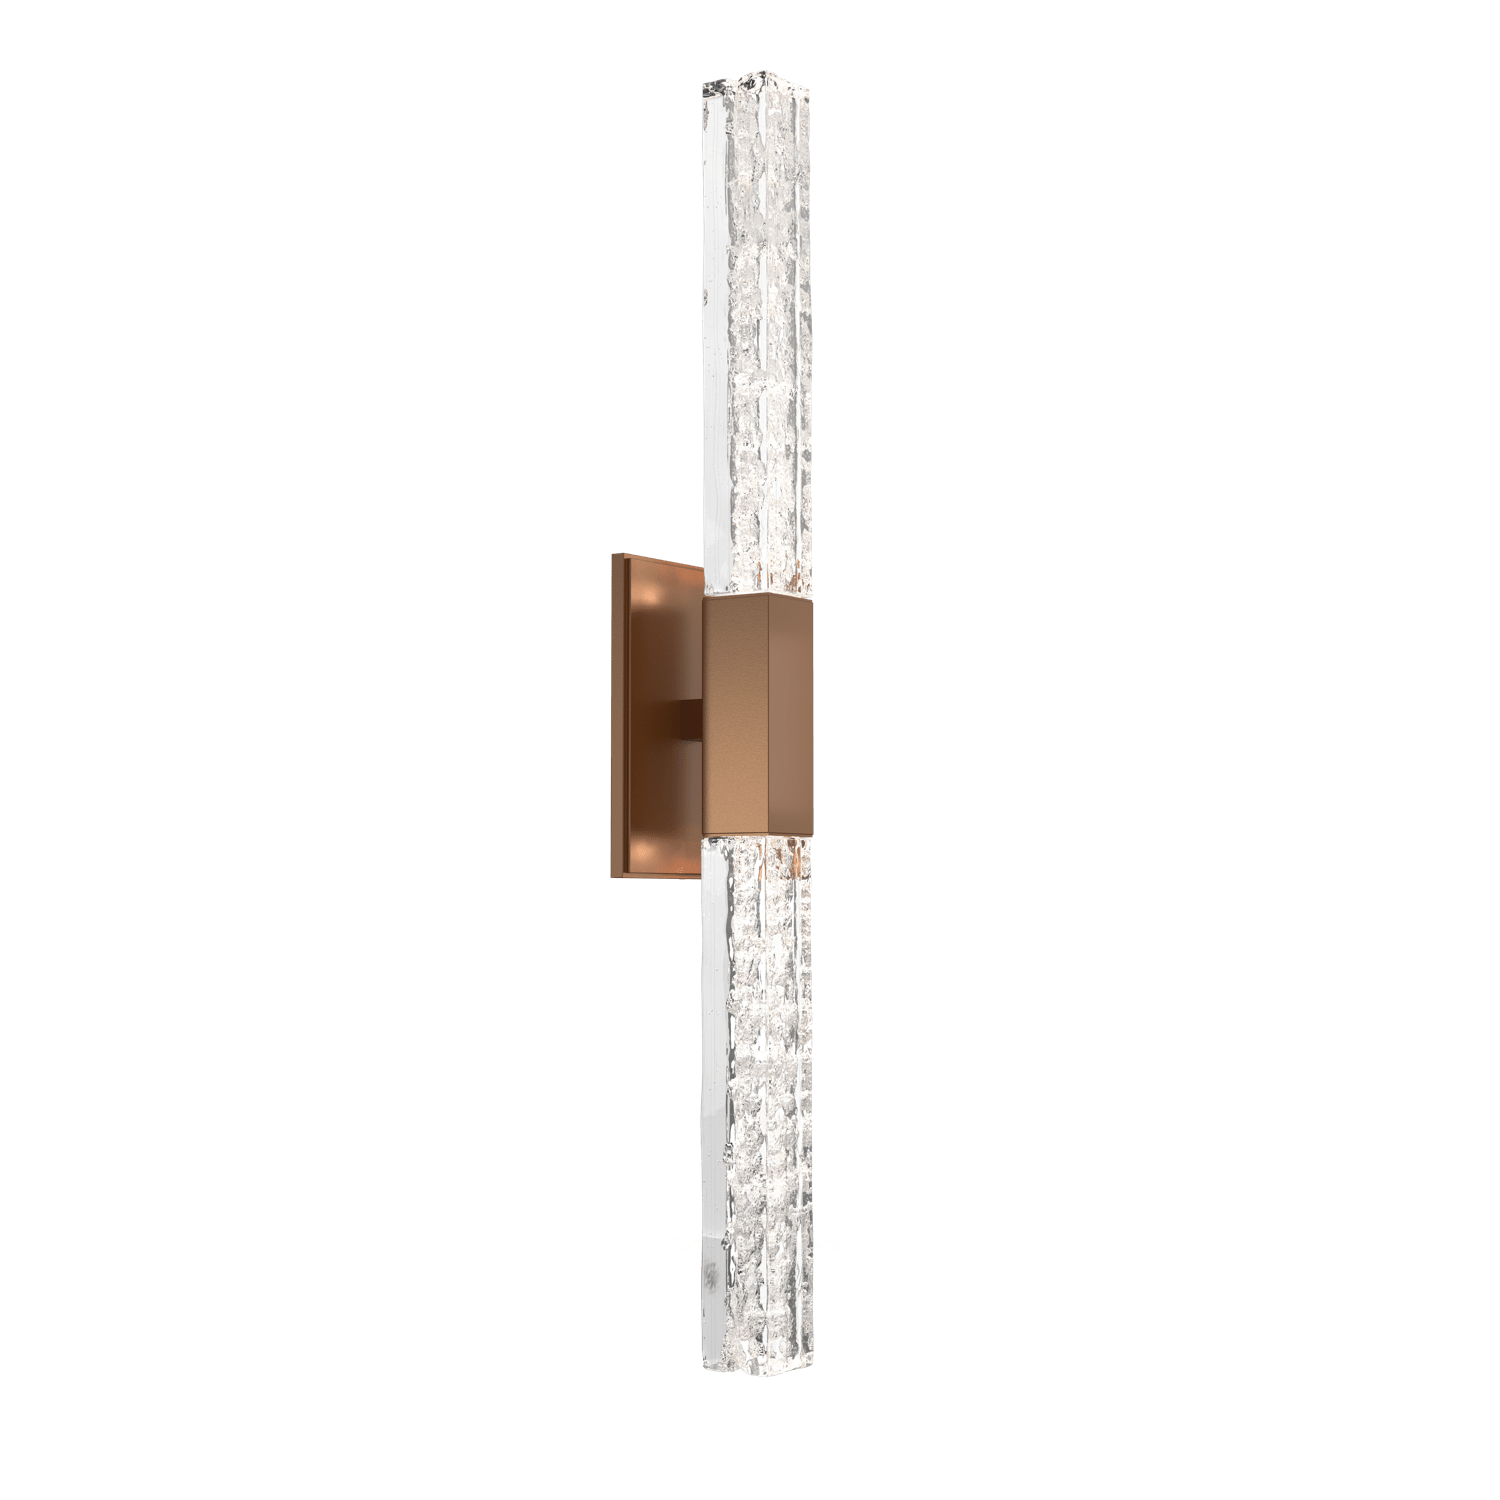 IDB0060-02-NB-GC-Hammerton-Studio-Axis-Double-Wall-Sconce-with-Novel-Brass-finish-and-clear-cast-glass-and-LED-lamping